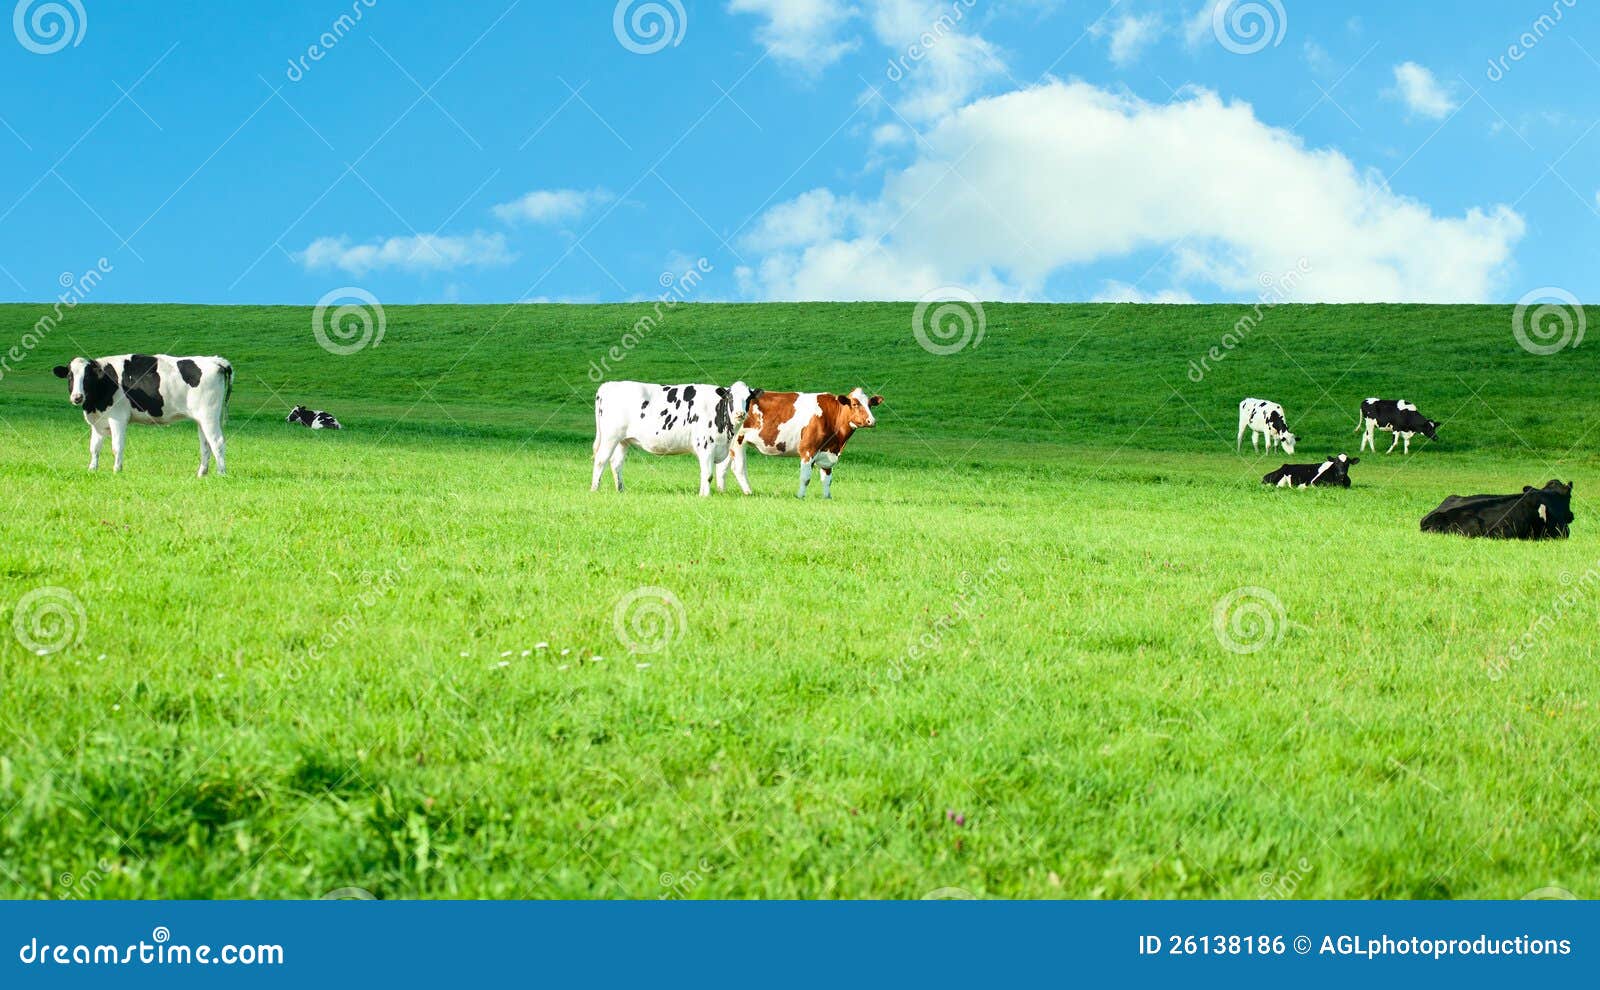 holstein cows in a lush pasture